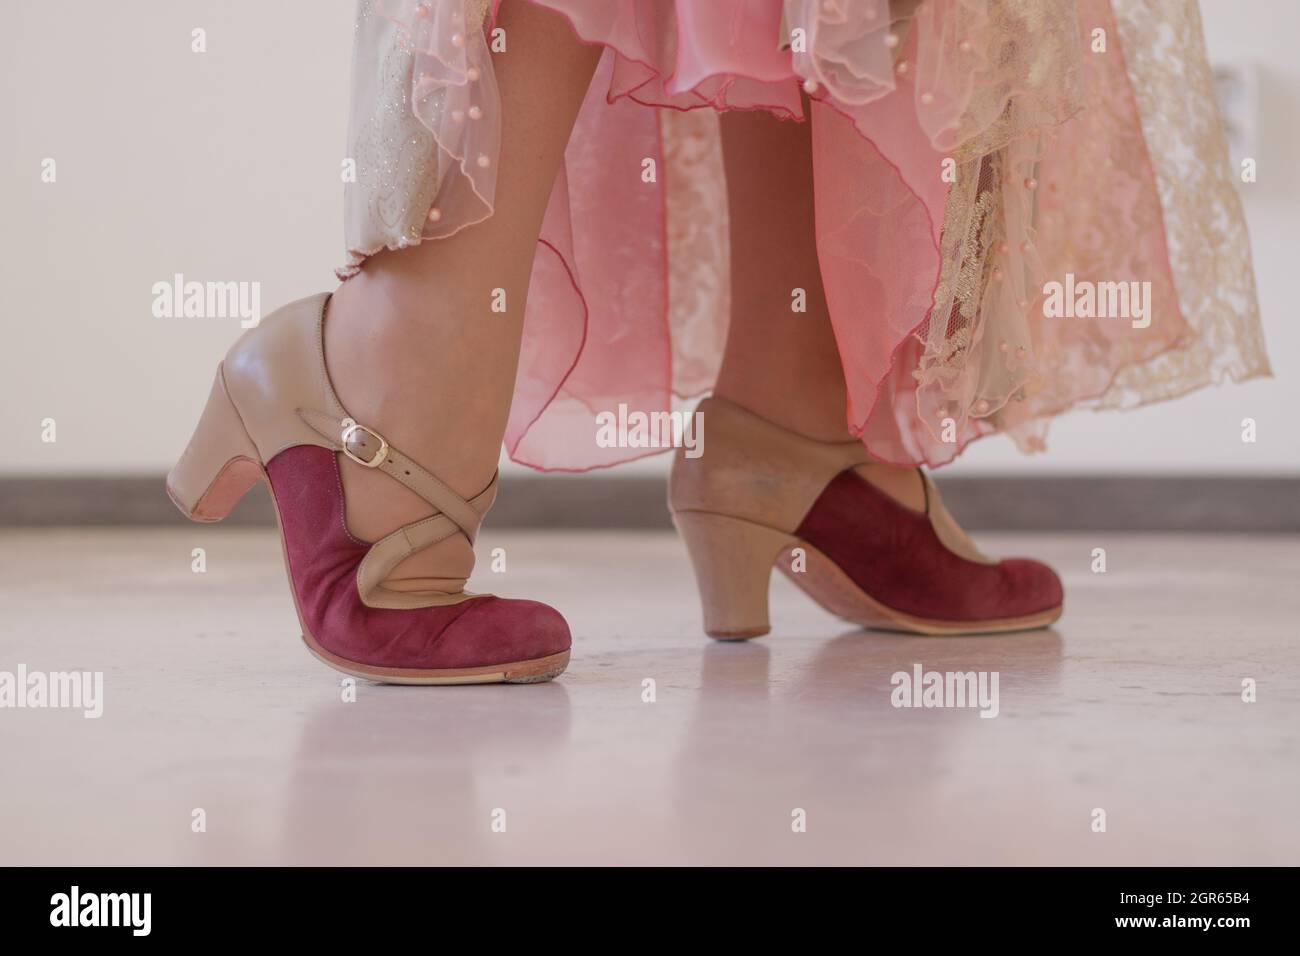 Pink And Beige Shoes For Flamenco Dance On Women's Legs. Close-up. Stock Photo